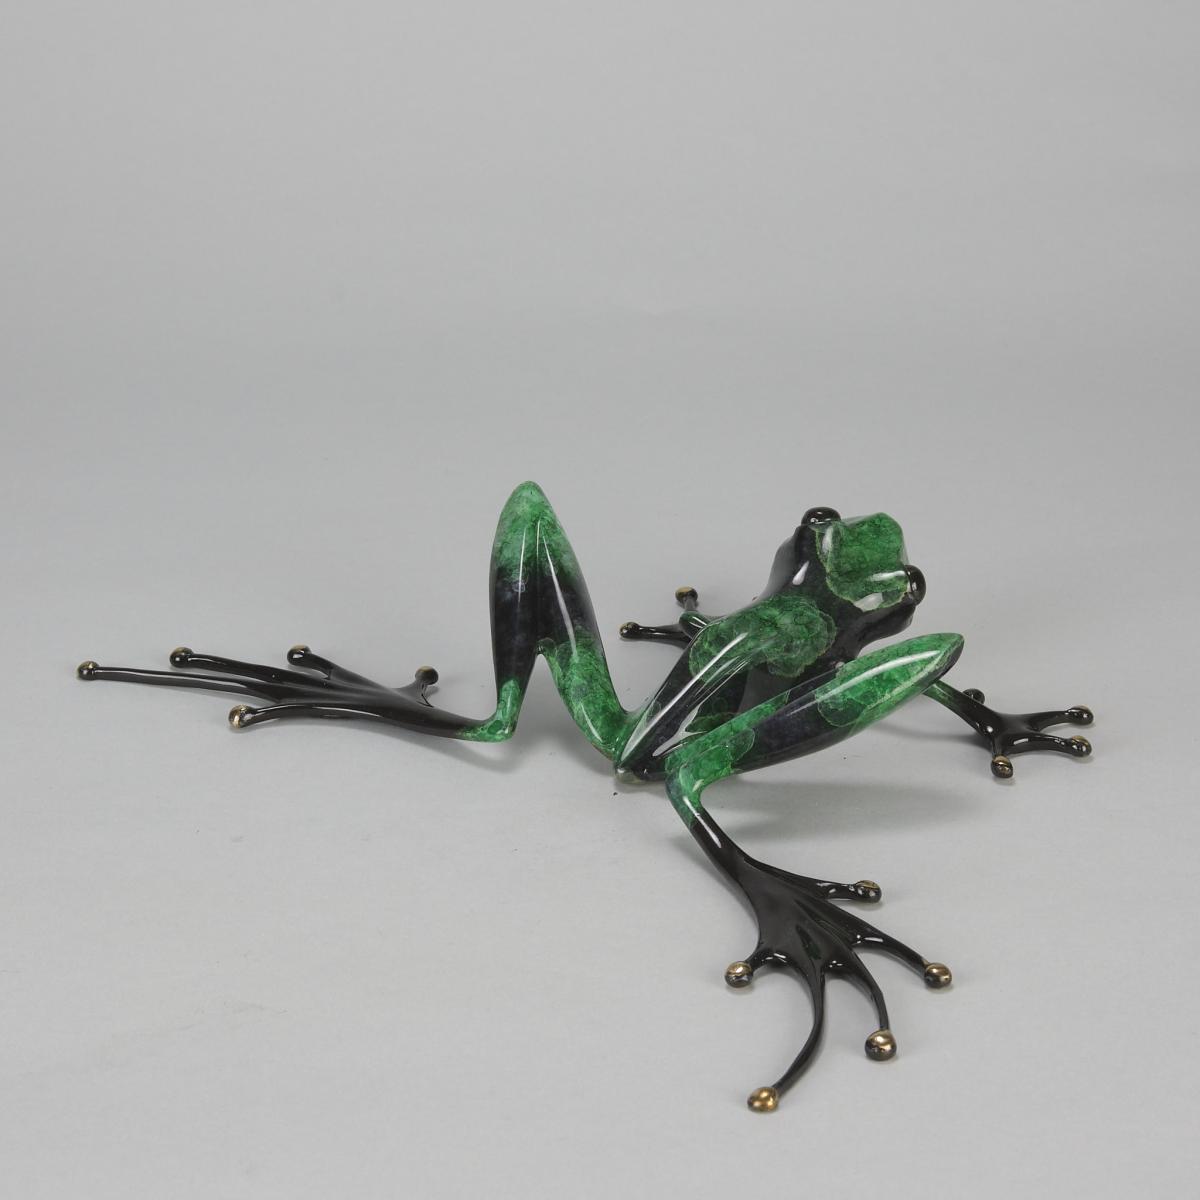 Contemporary Enamelled Bronze Sculpture entitled "Surf" by Tim Cotterill 